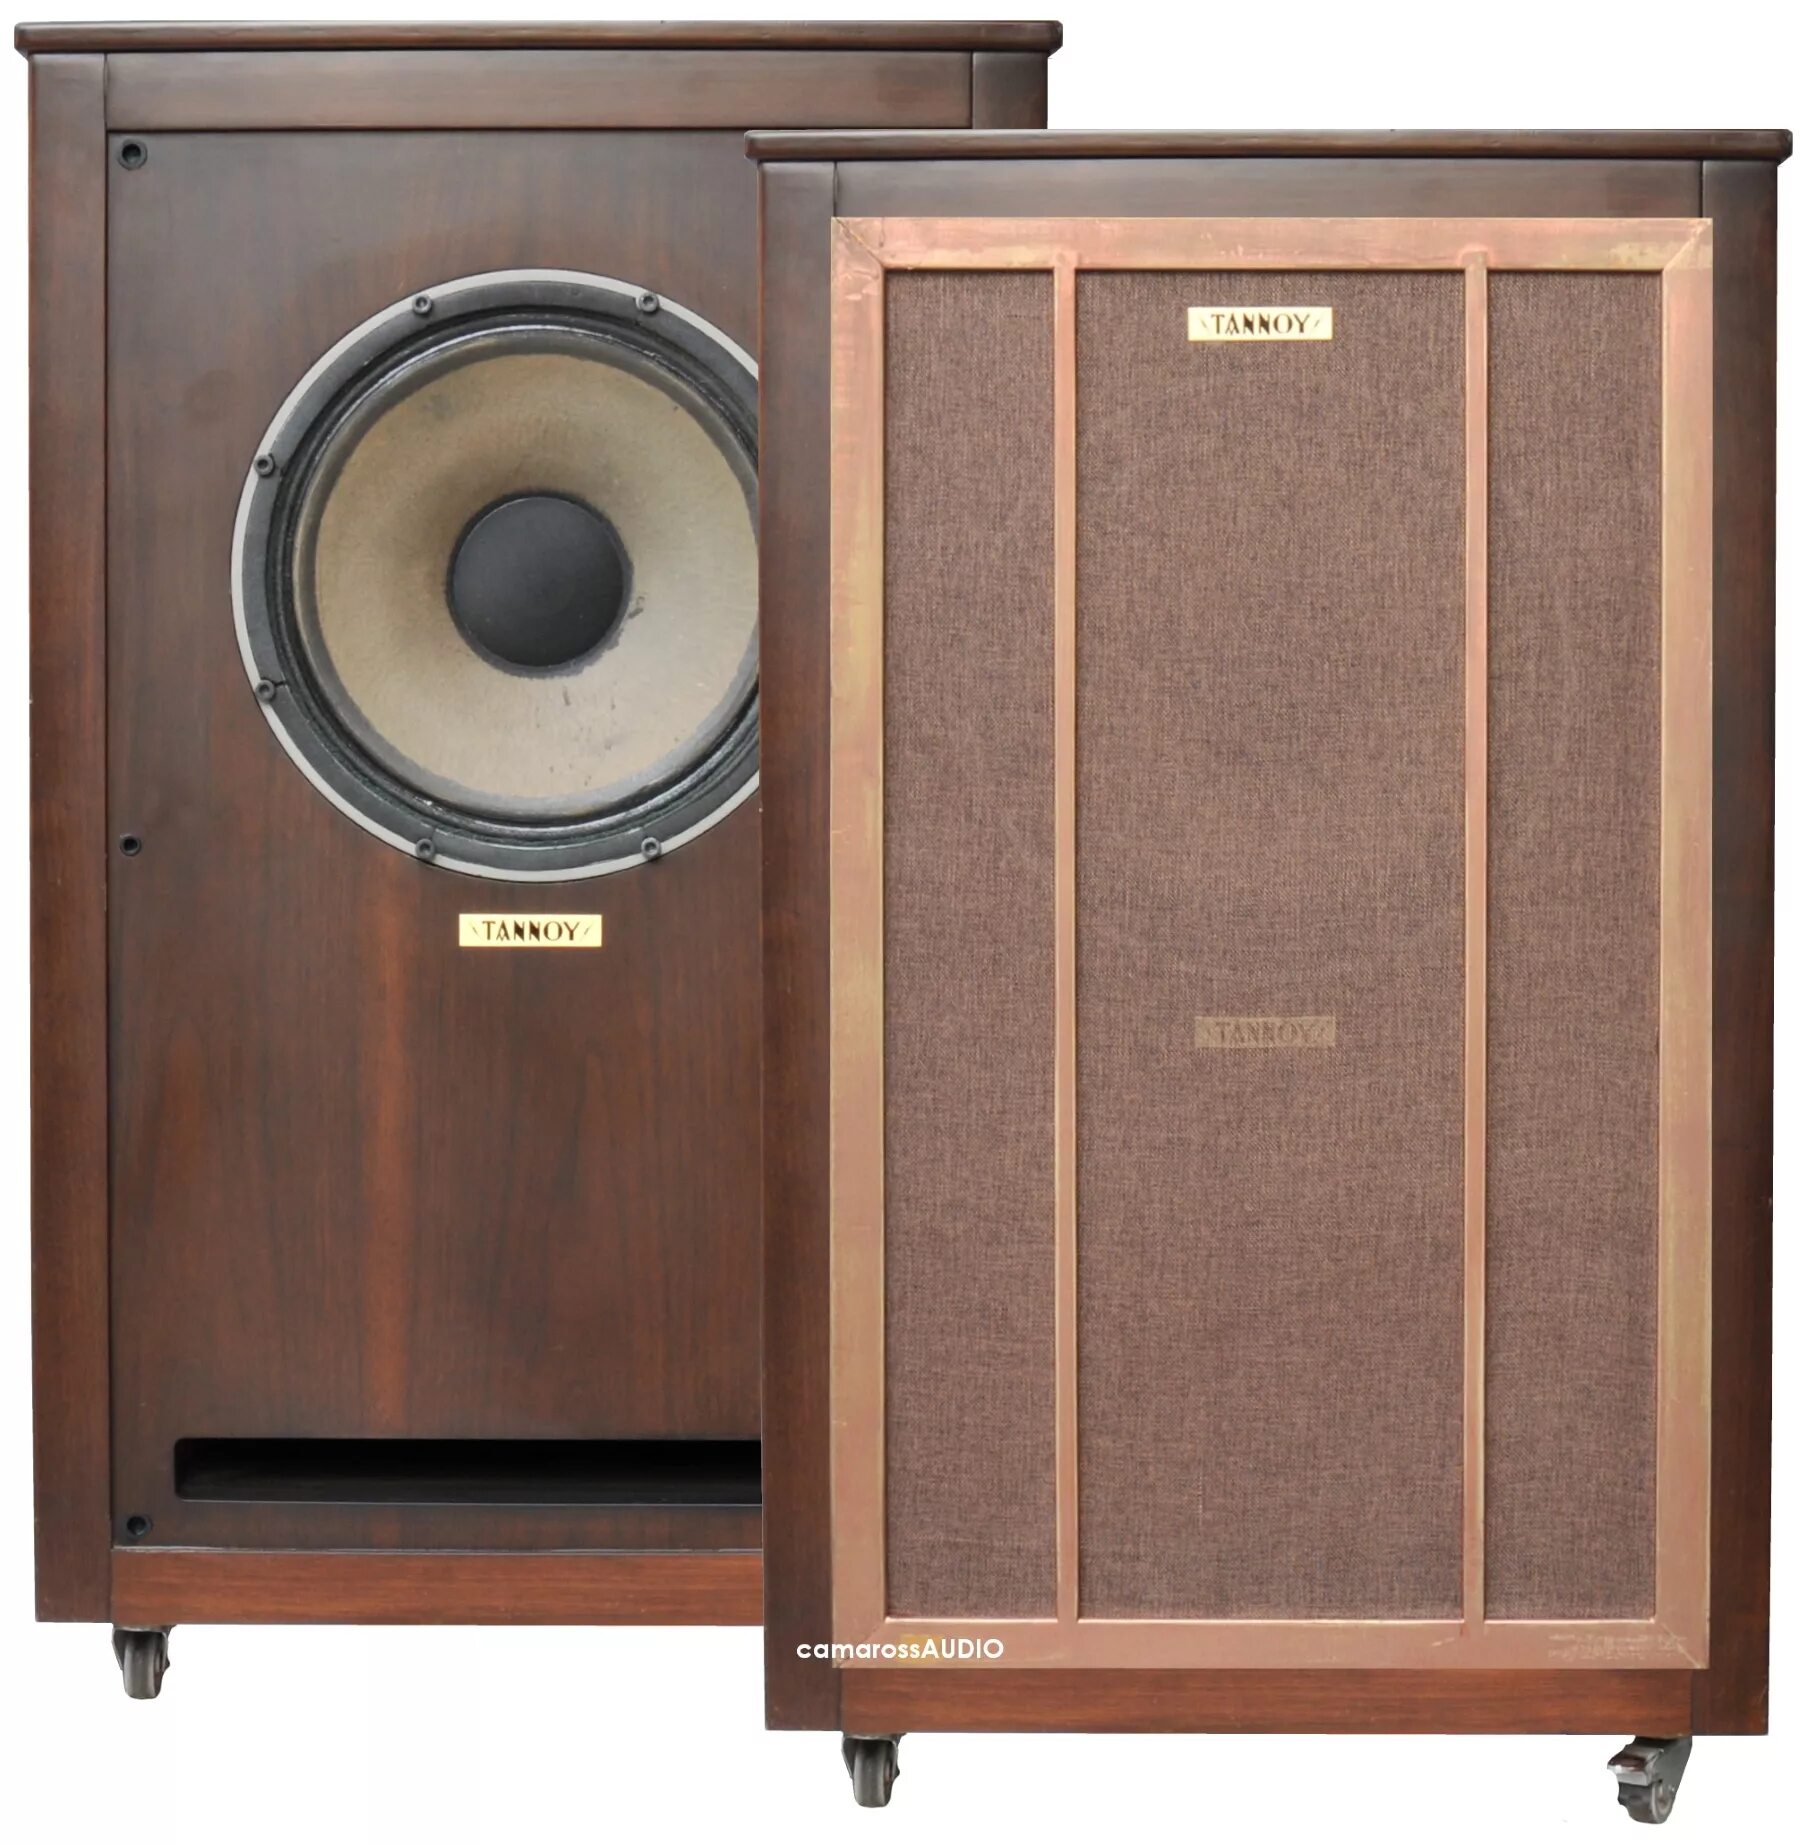 Tannoy super Gold Monitor 15. Tannoy little Gold Monitor 12. Tannoy Monitor Gold 15 JBL. Tannoy little Gold Monitor.